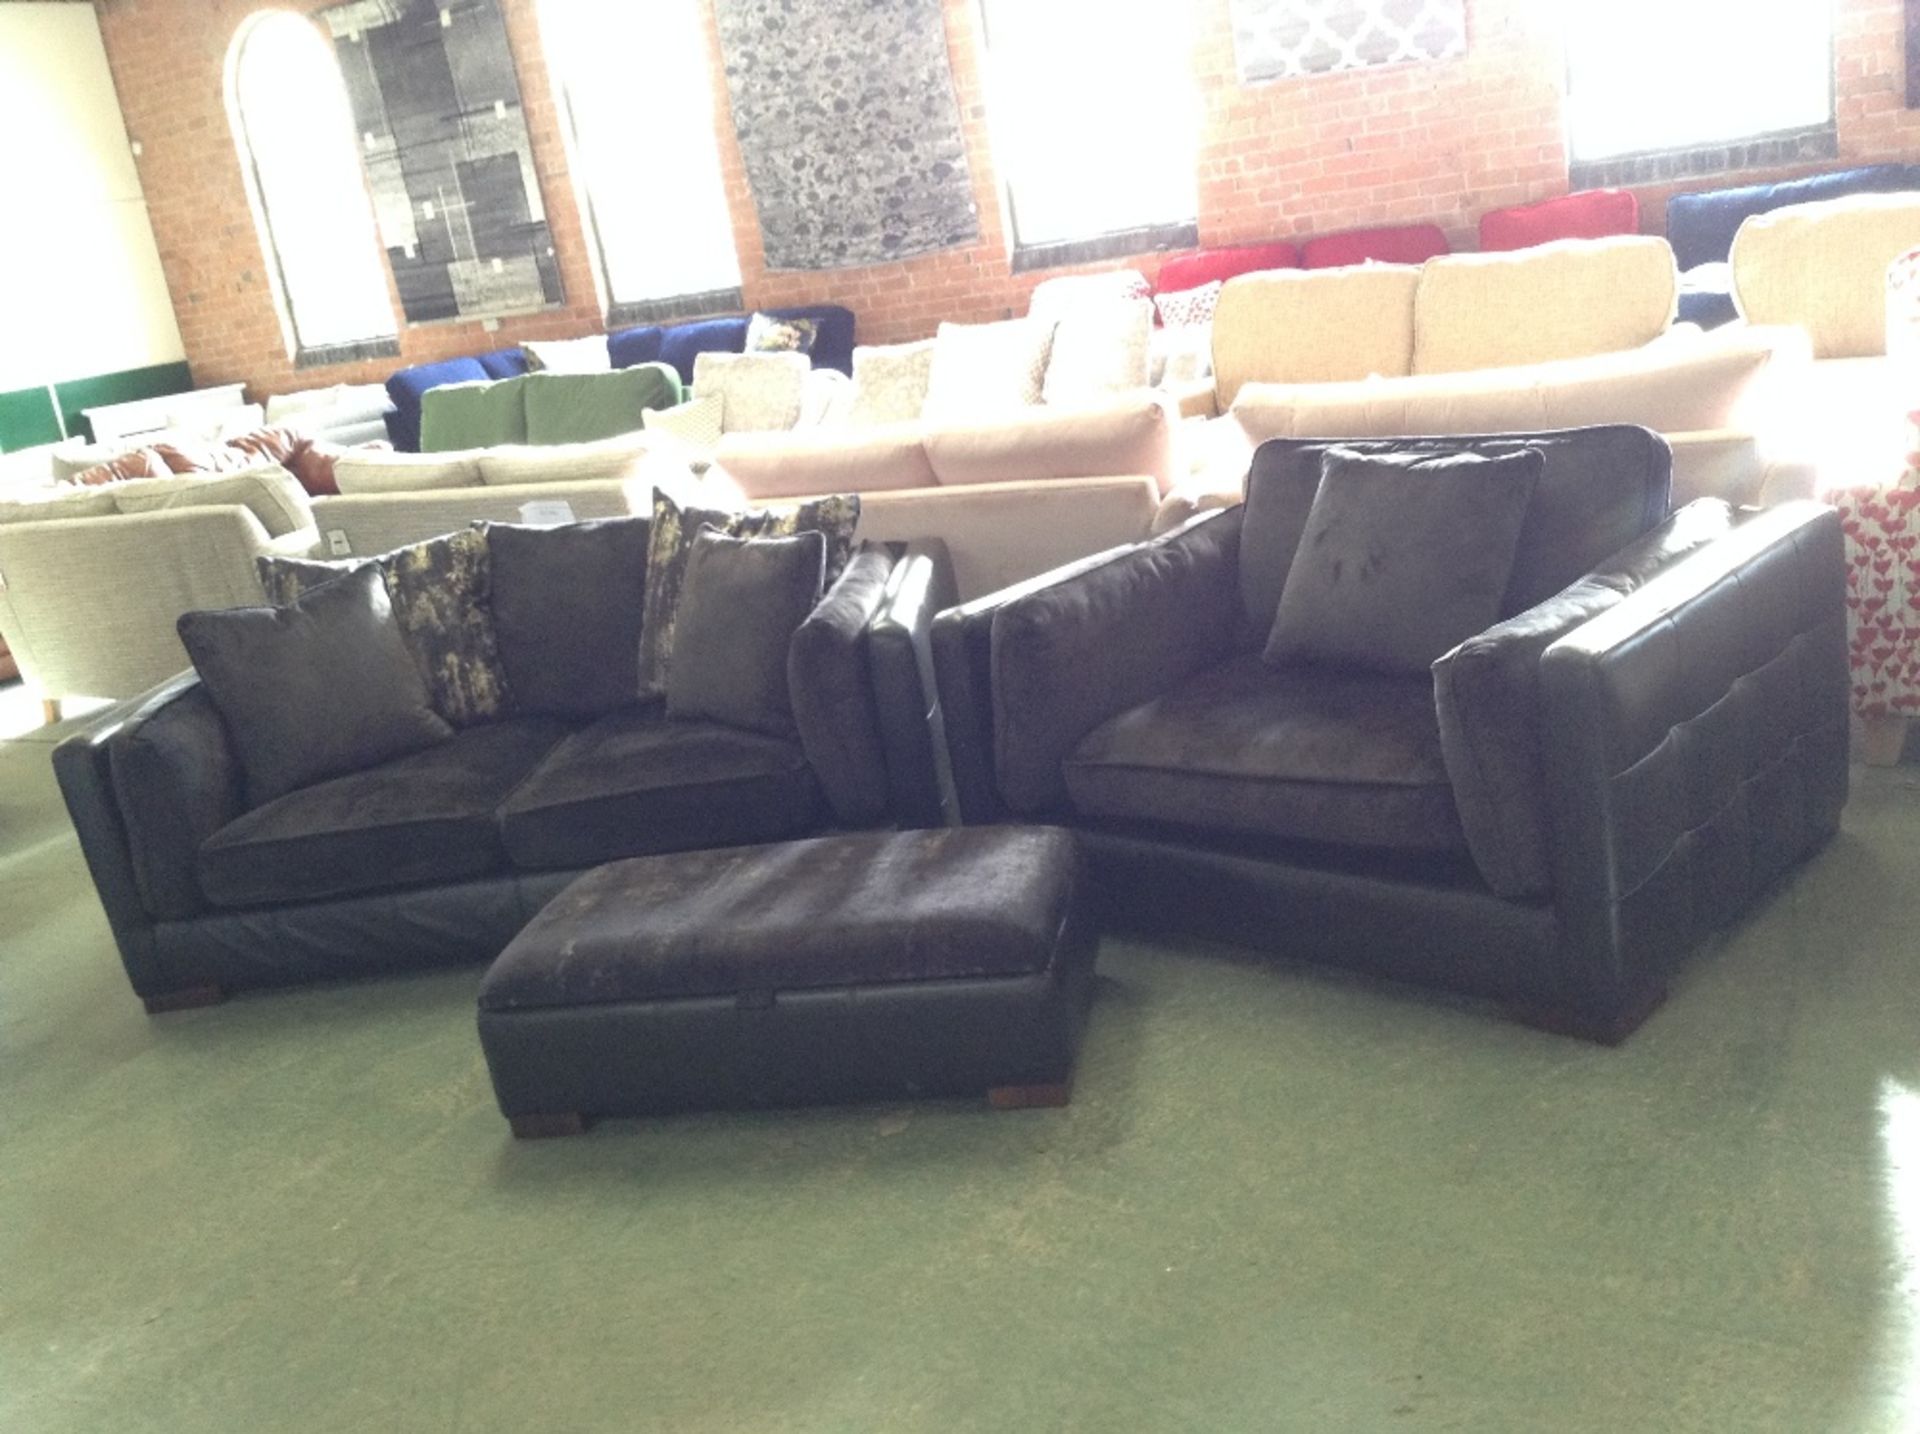 BLACK HALF HIDE 2 SEATER SOFA SNUG CHAIR AND FOOTS